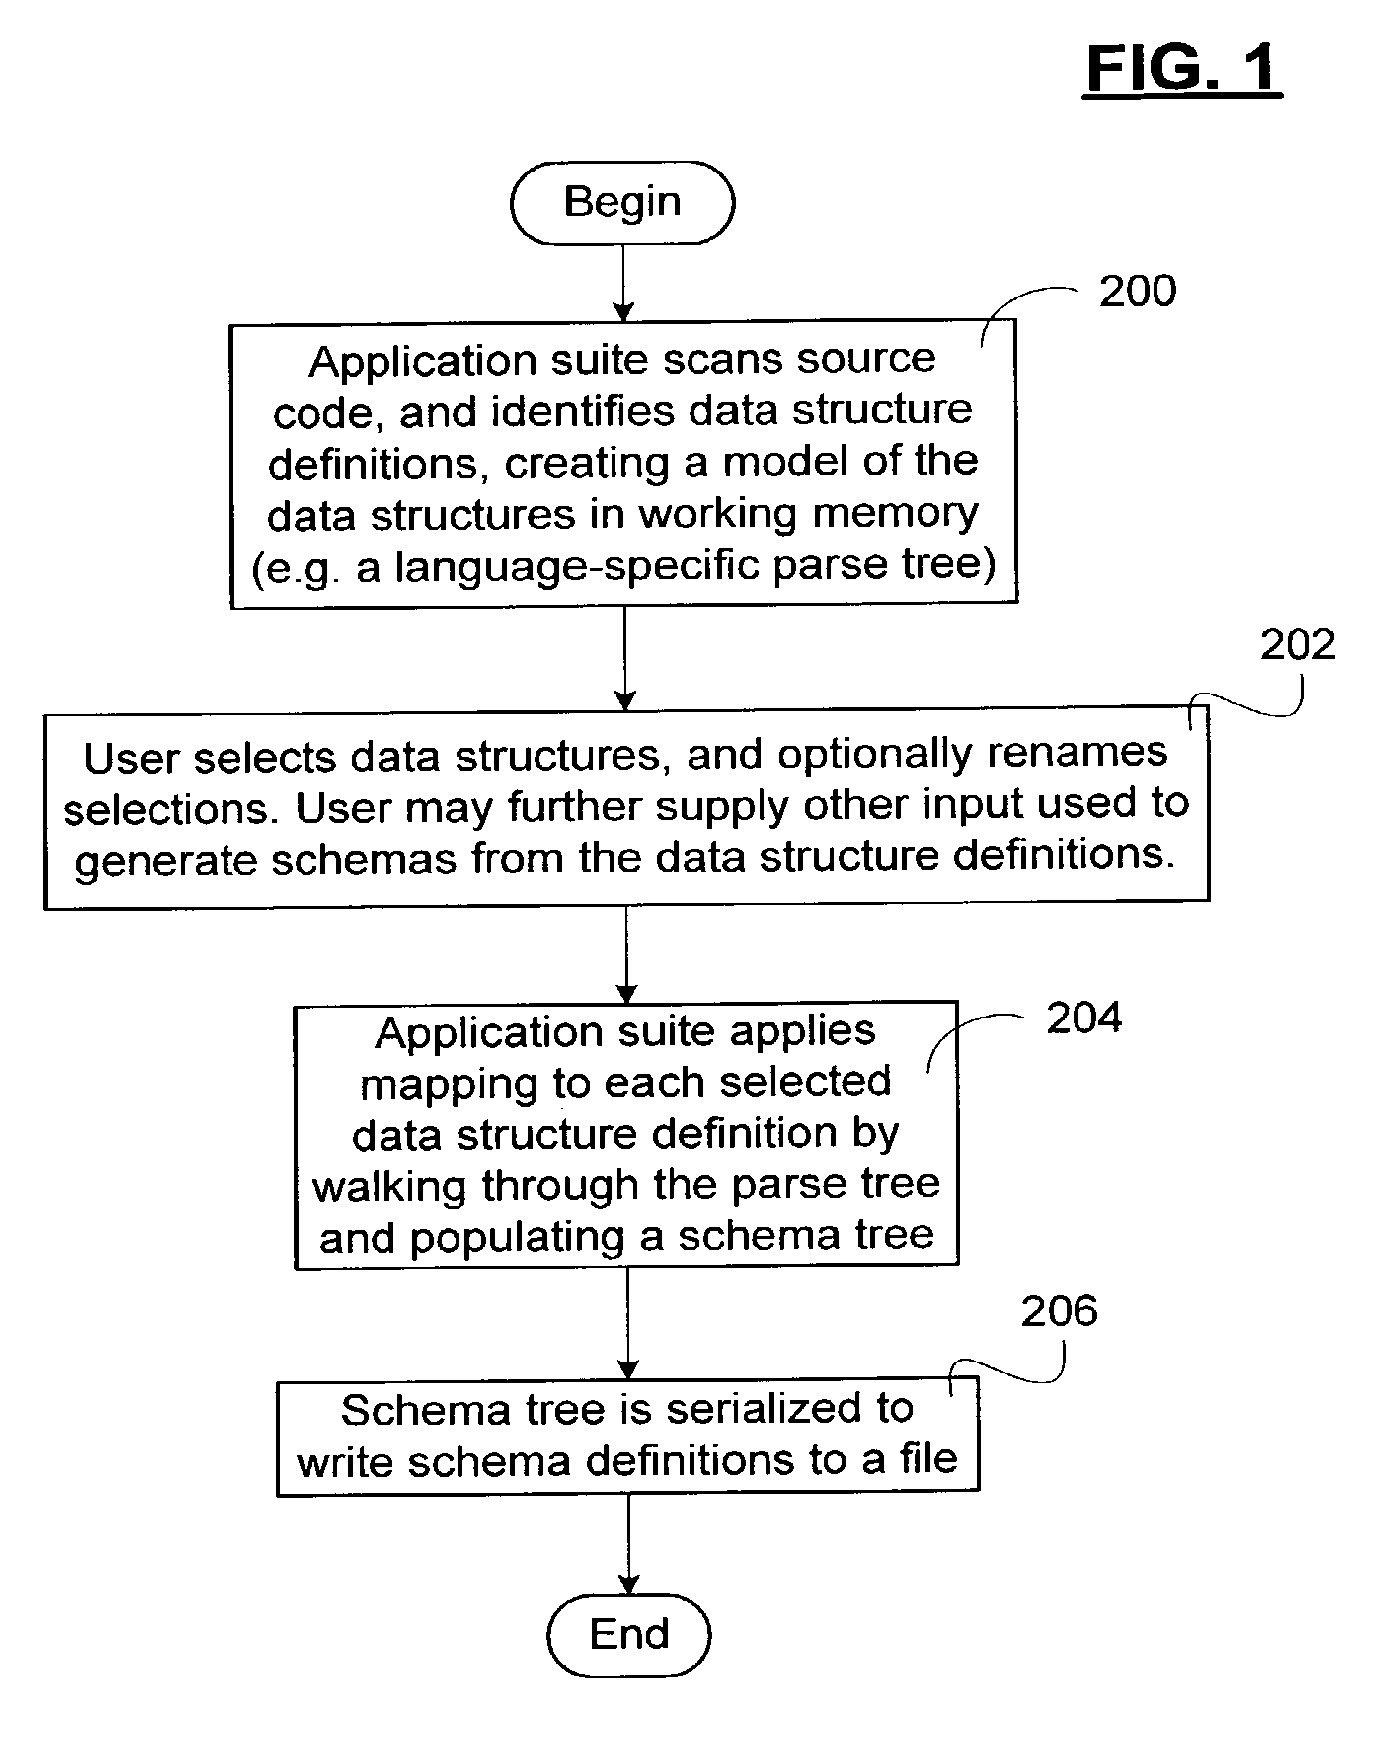 Method and Apparatus for Converting Legacy Programming Language Data Structures to Schema Definitions